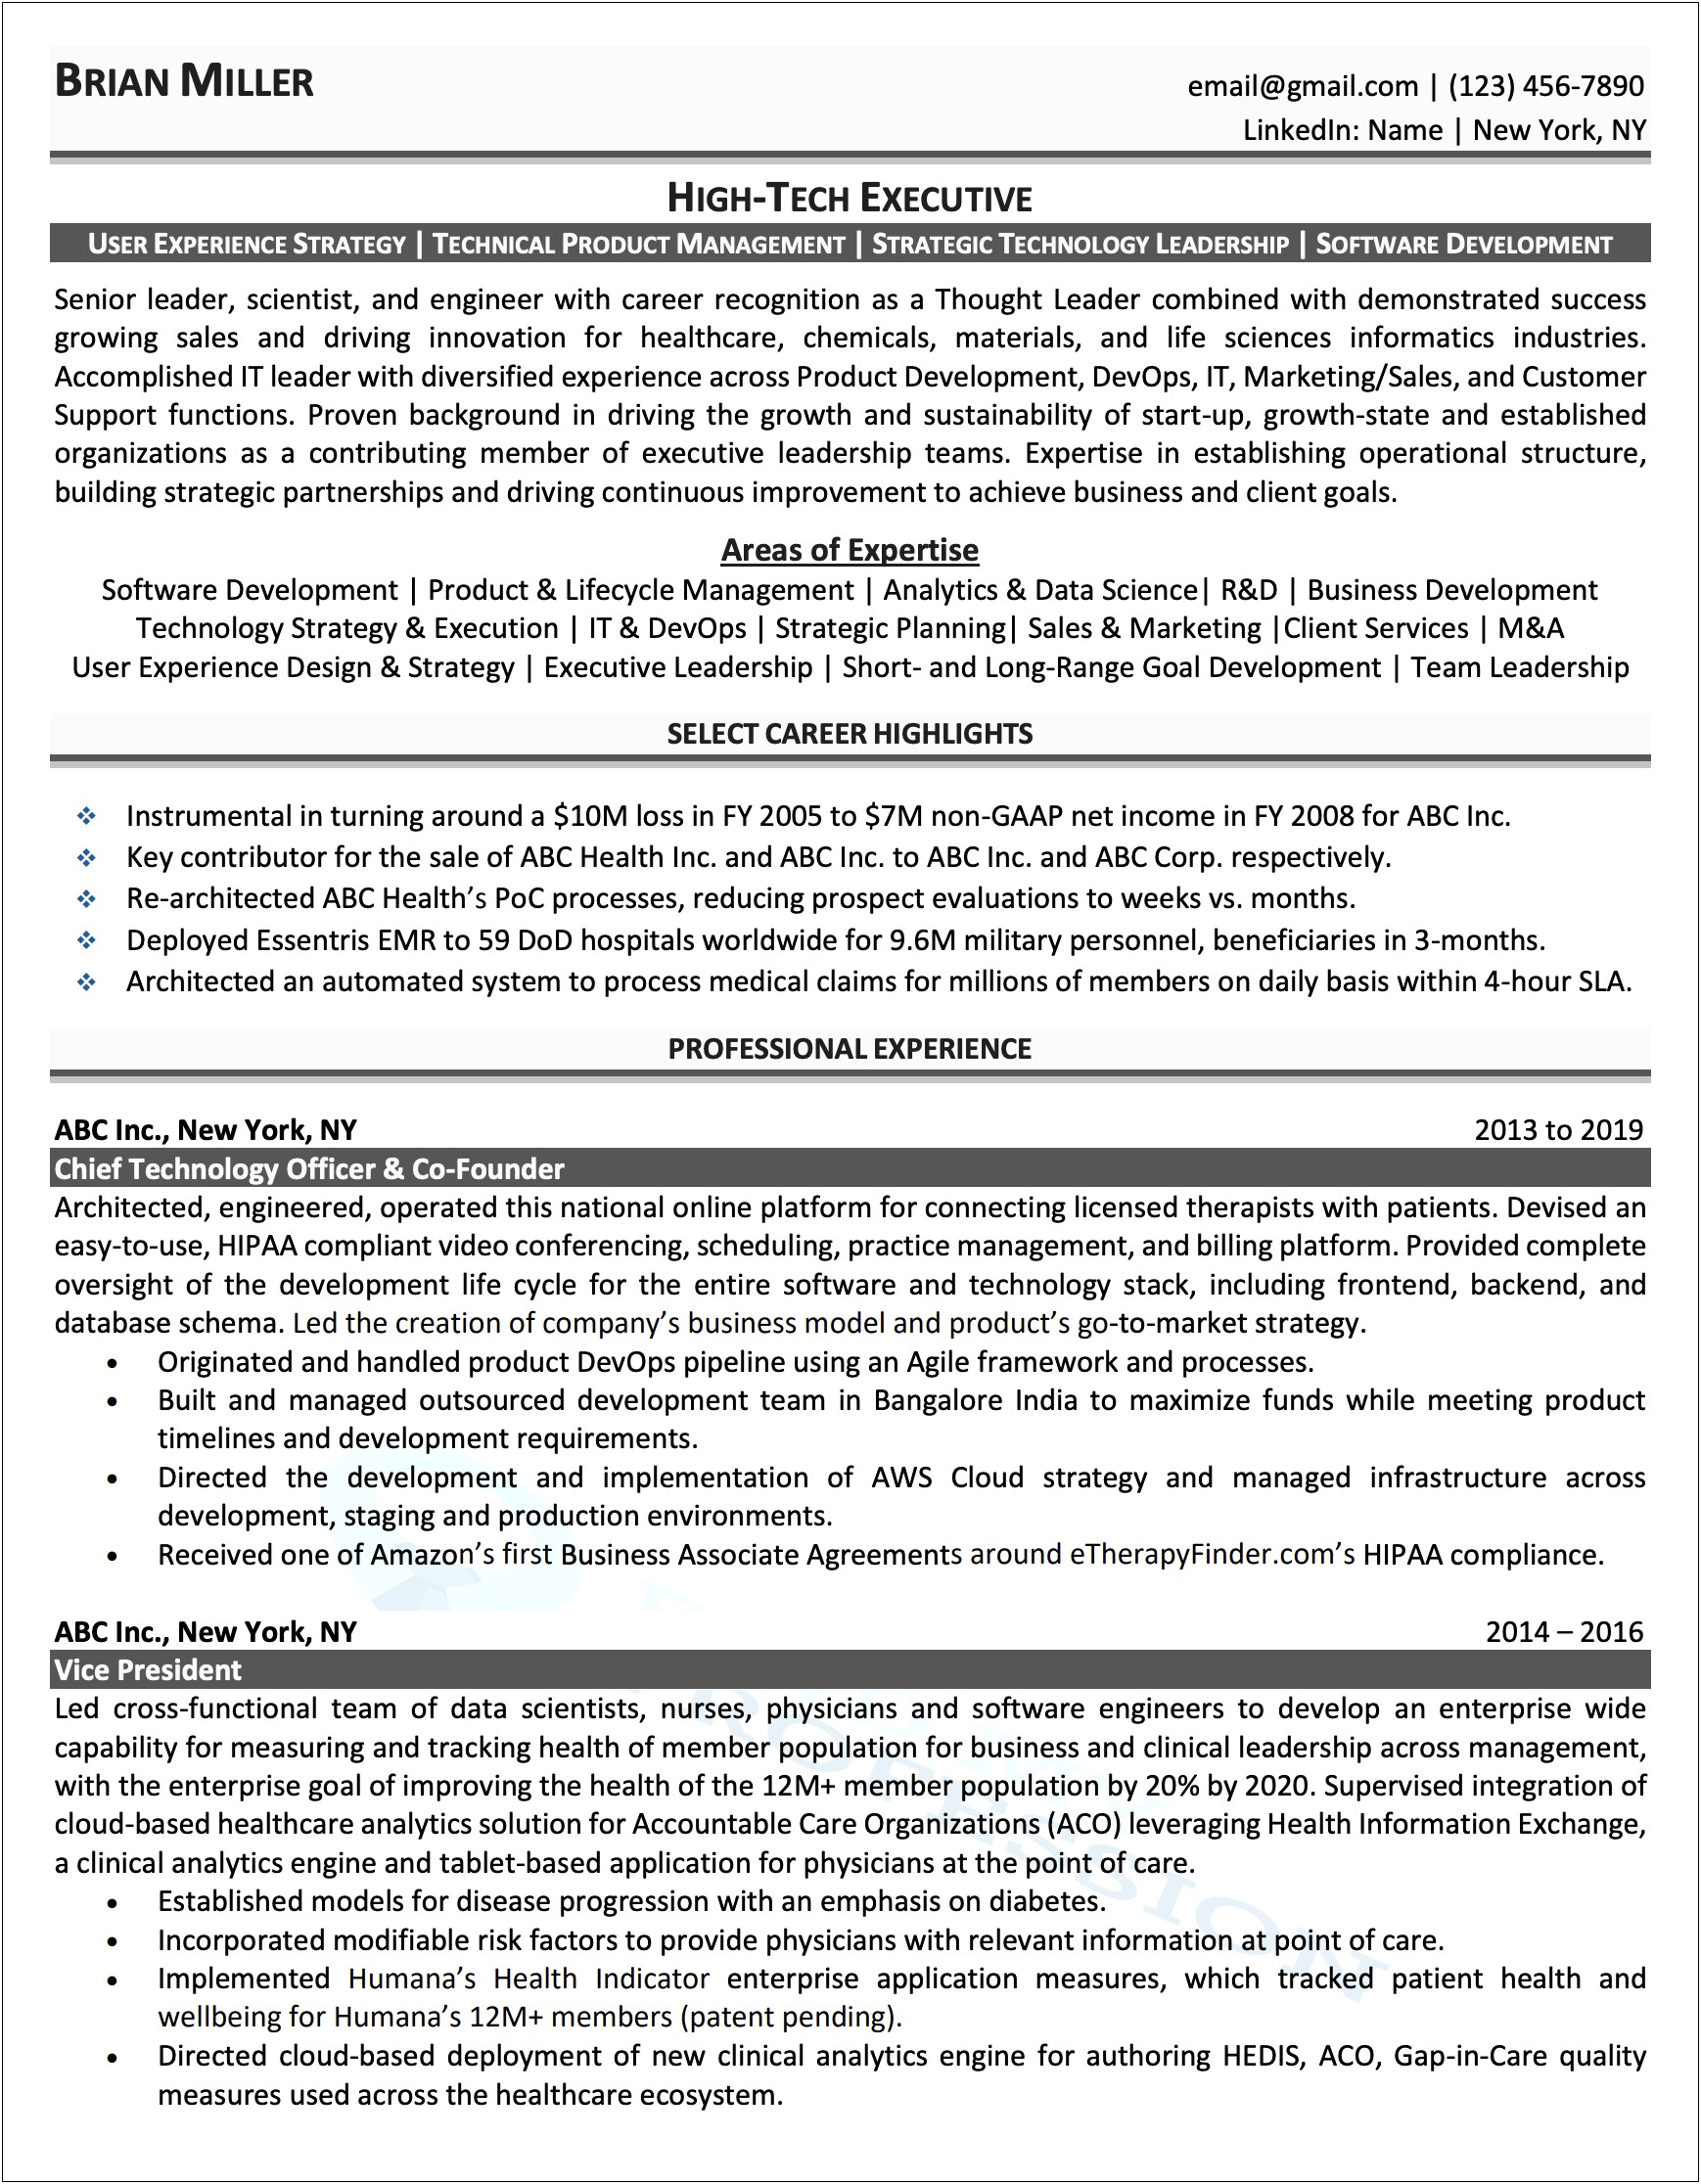 Relationship Manager Bank Of America Resume